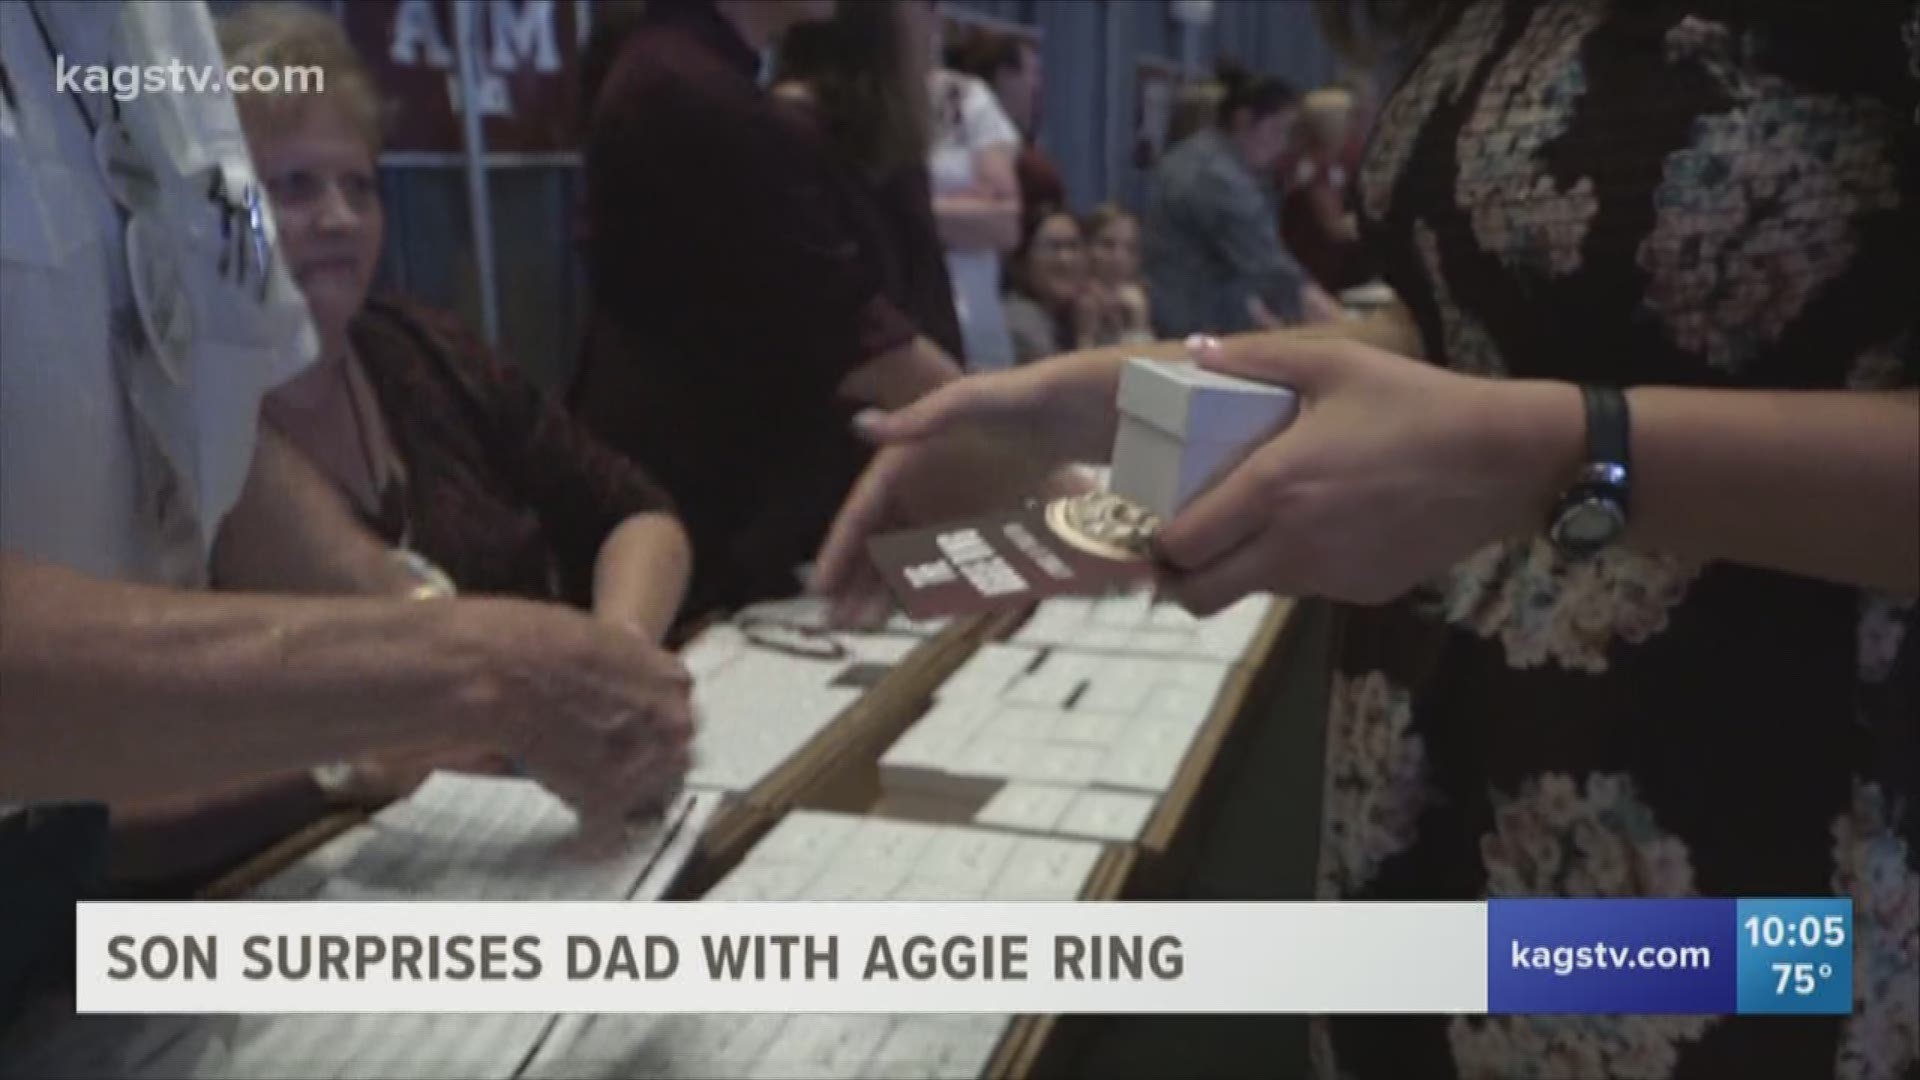 Over 6500 rings are to be presented today and tomorrow for ring day here at Texas A&M. But one student isn't just getting his ring, he's giving one to someone very special.